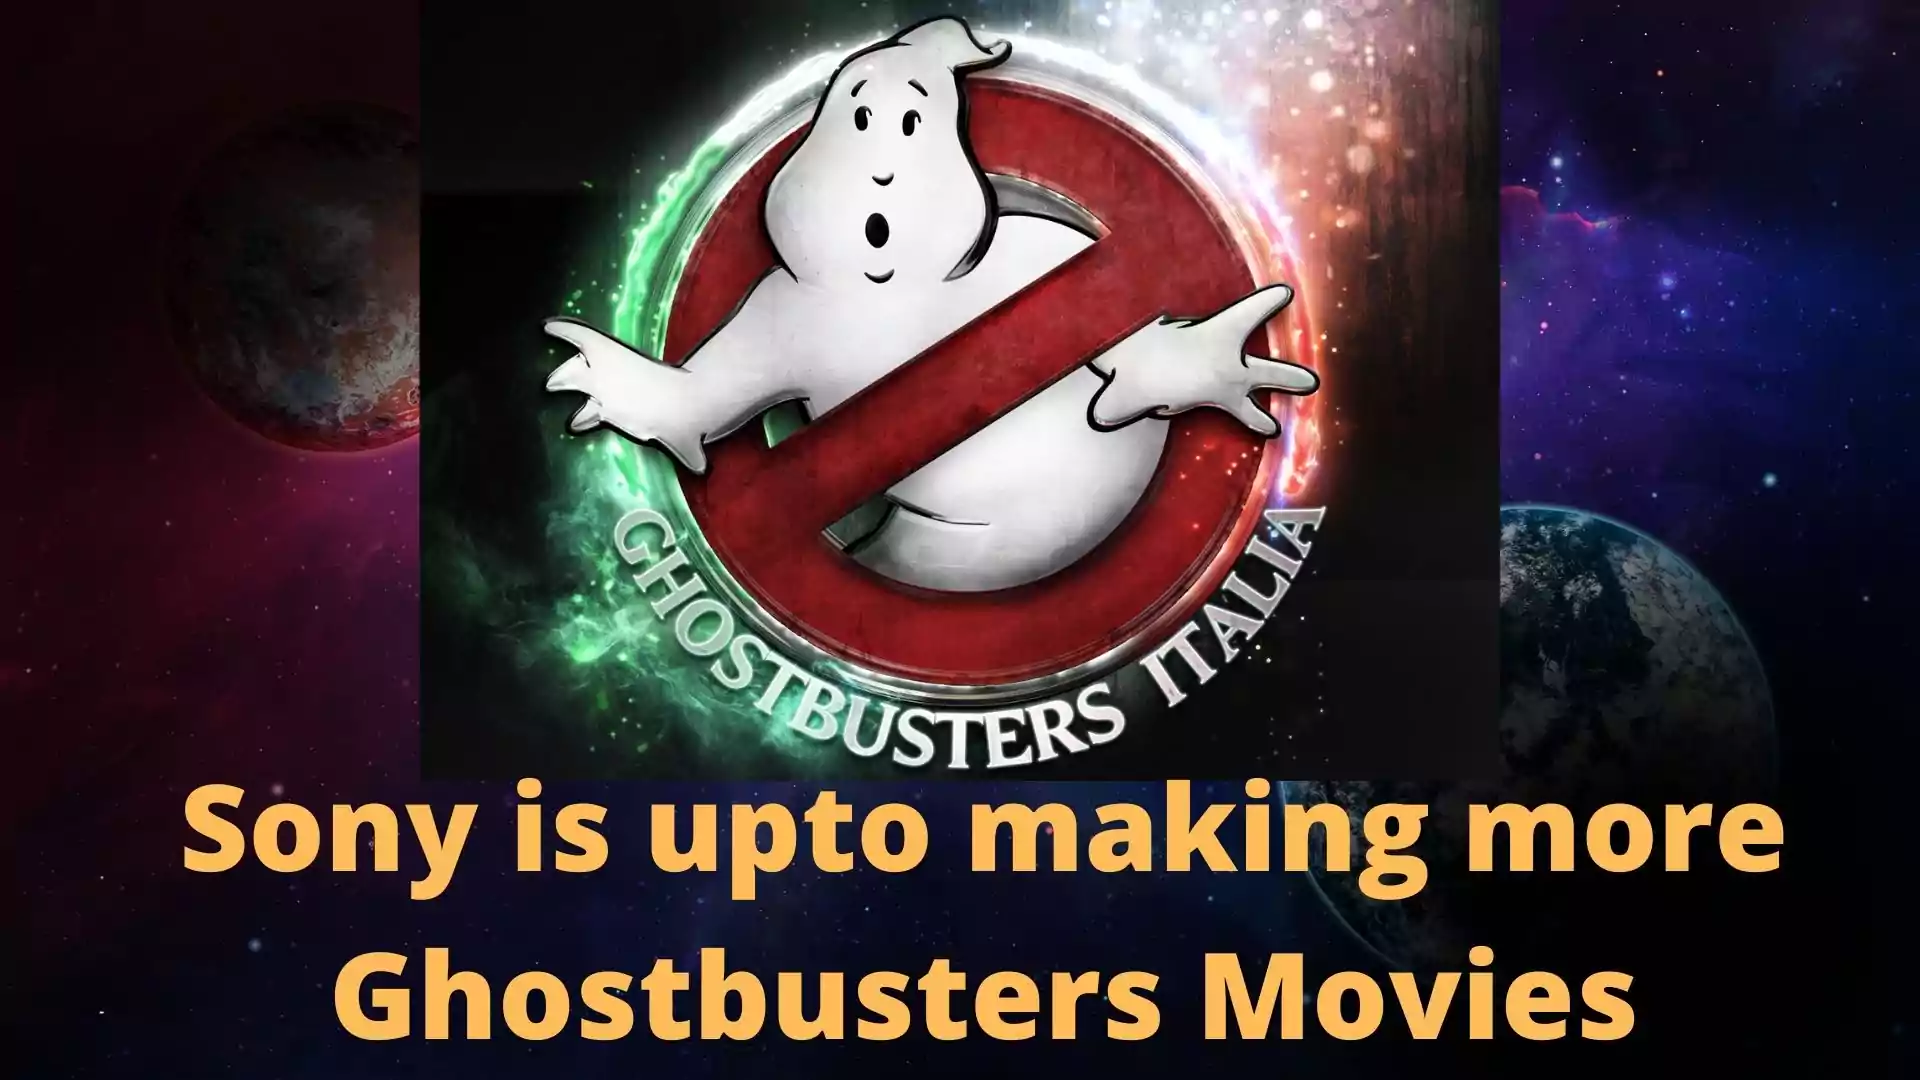 Sony is upto making more Ghostbusters Movies